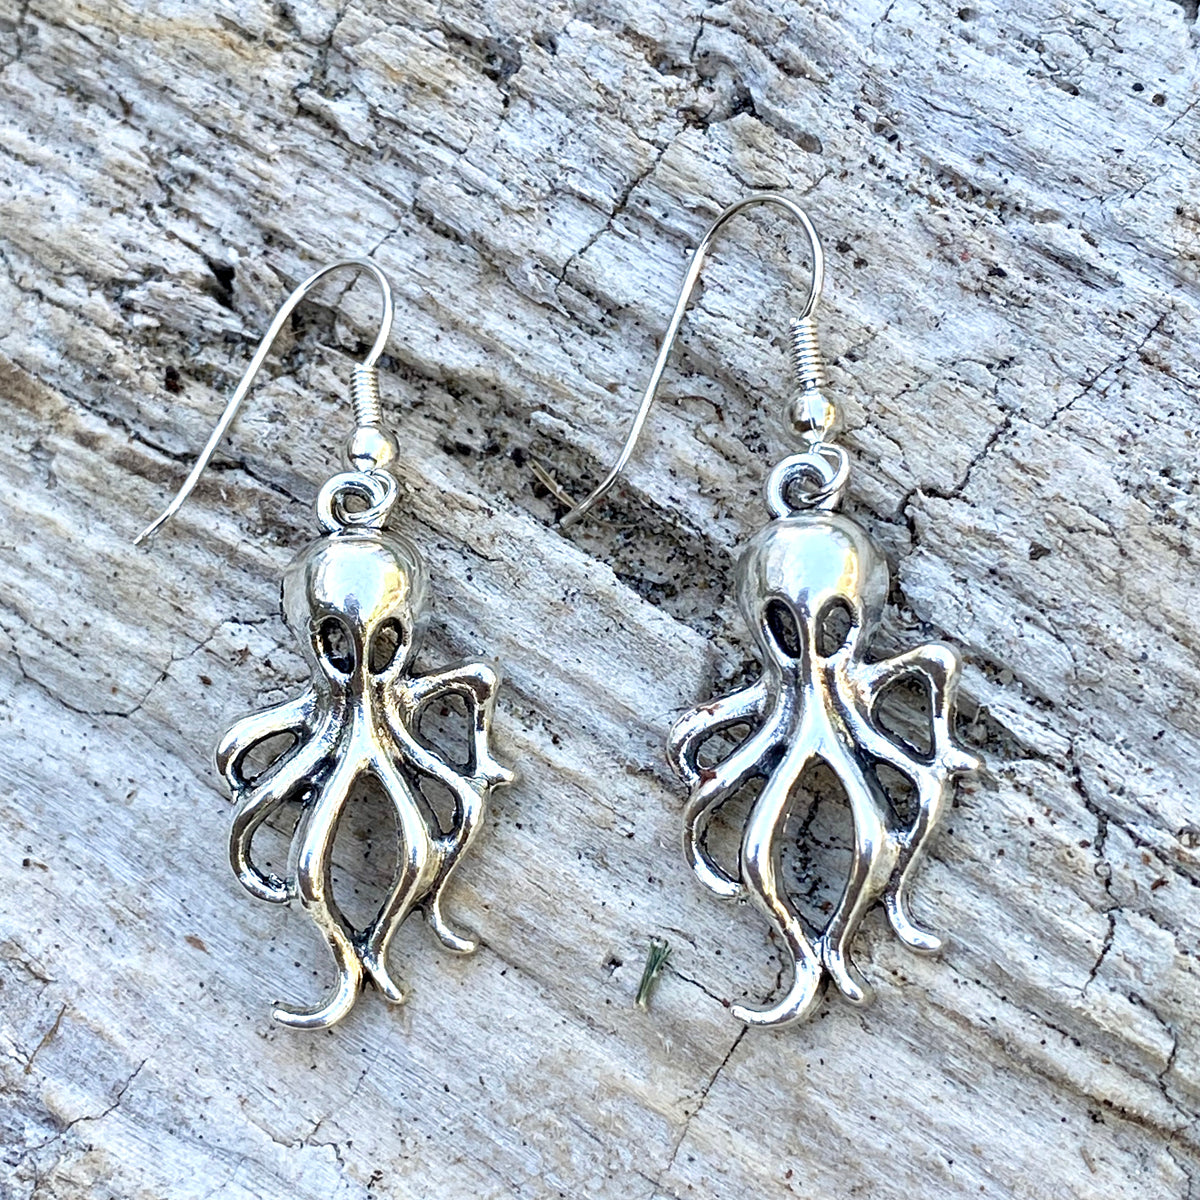 Octopus Earrings to Symbolize Adaptability